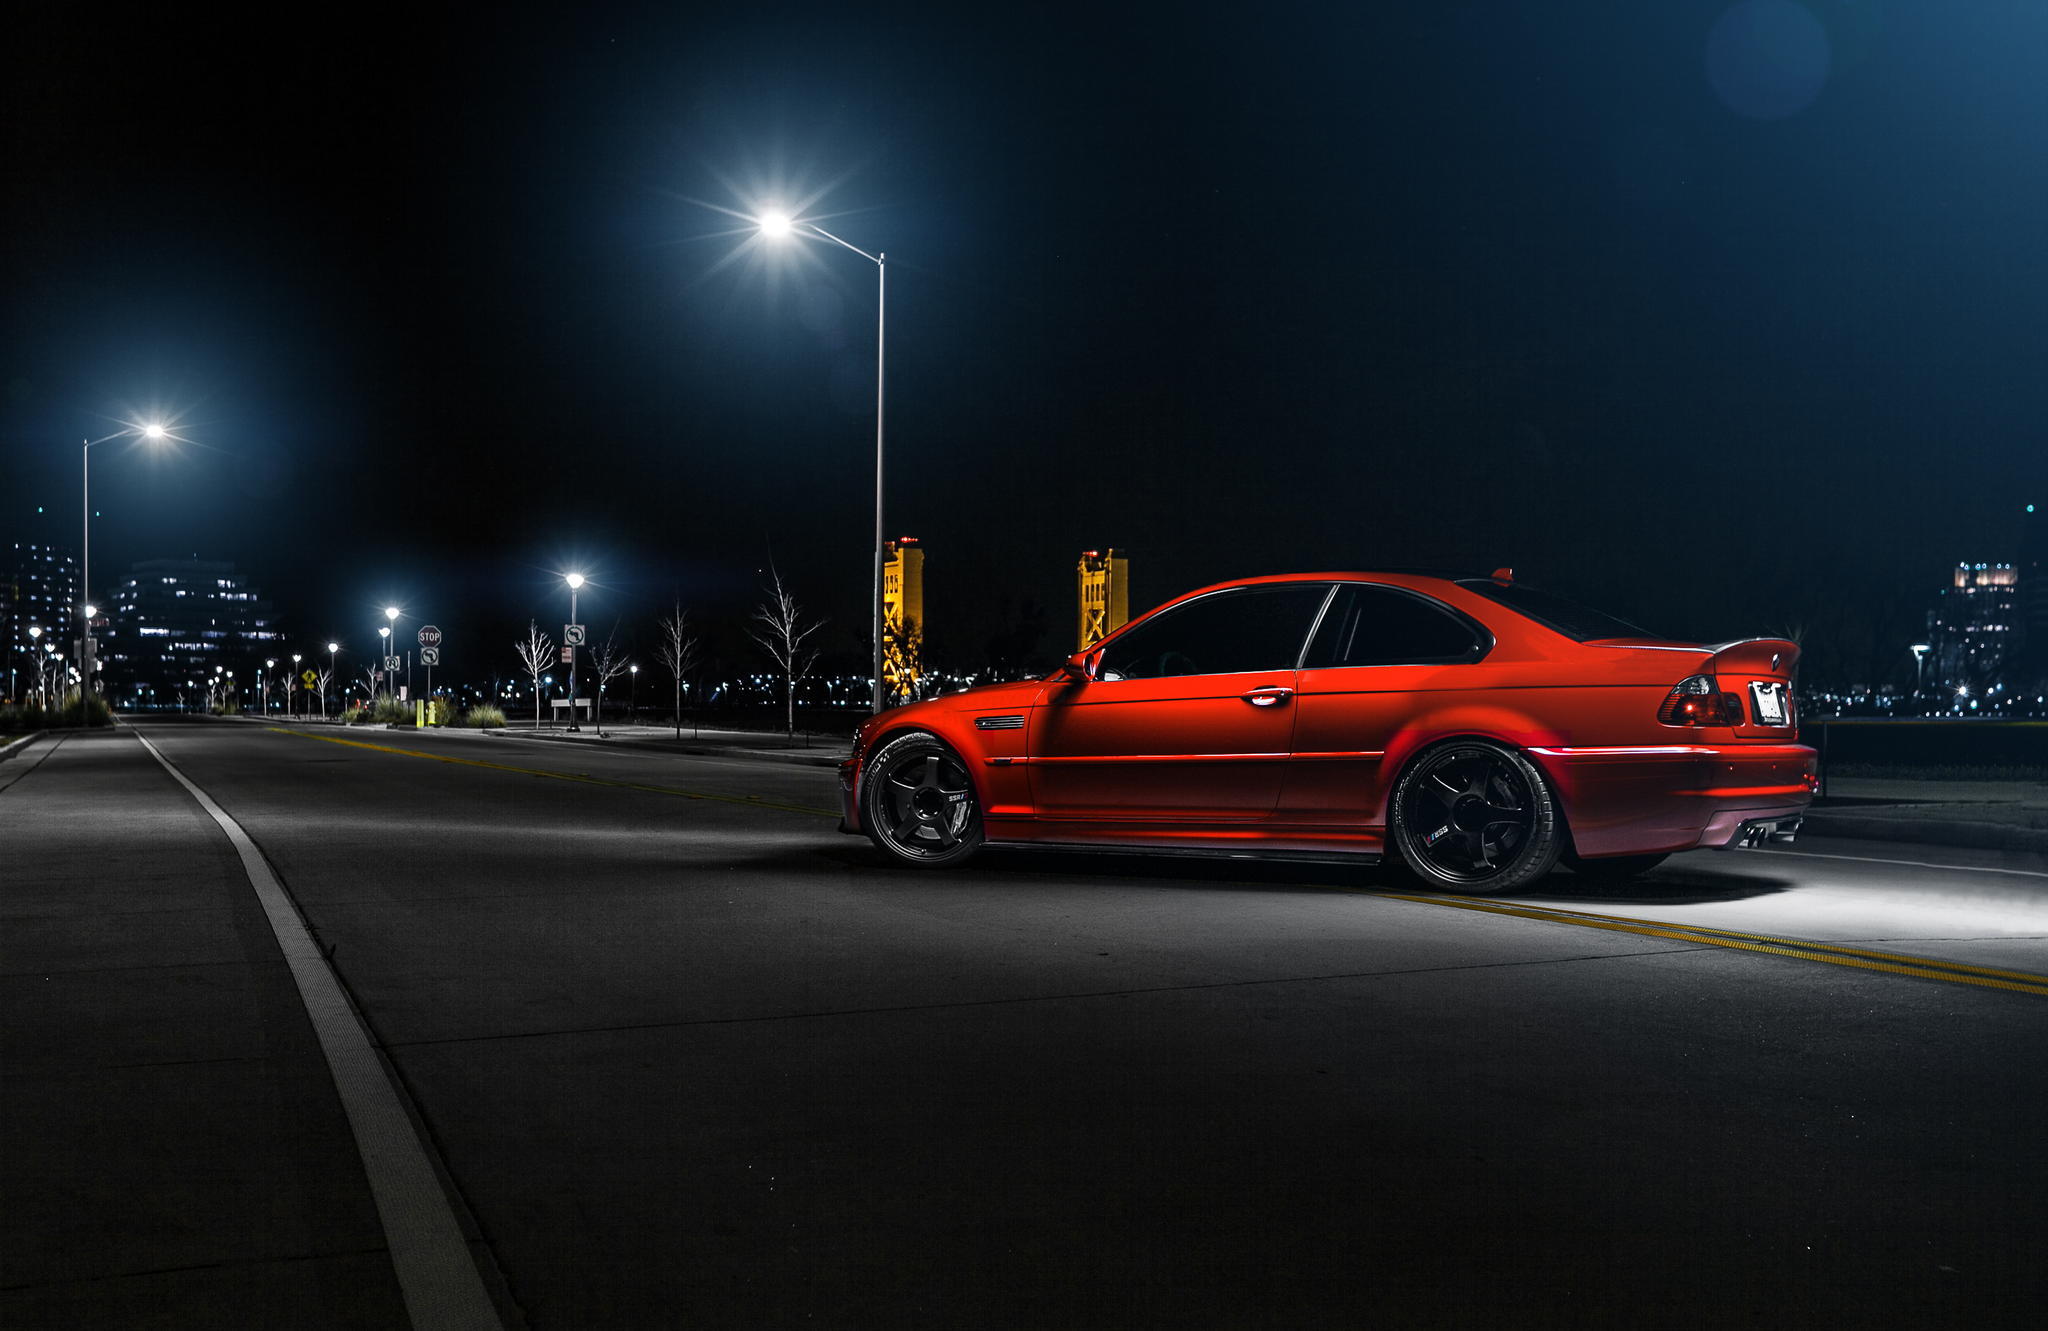 141945 download wallpaper auto, bmw, night, cars, red, side view, e46, m3 screensavers and pictures for free